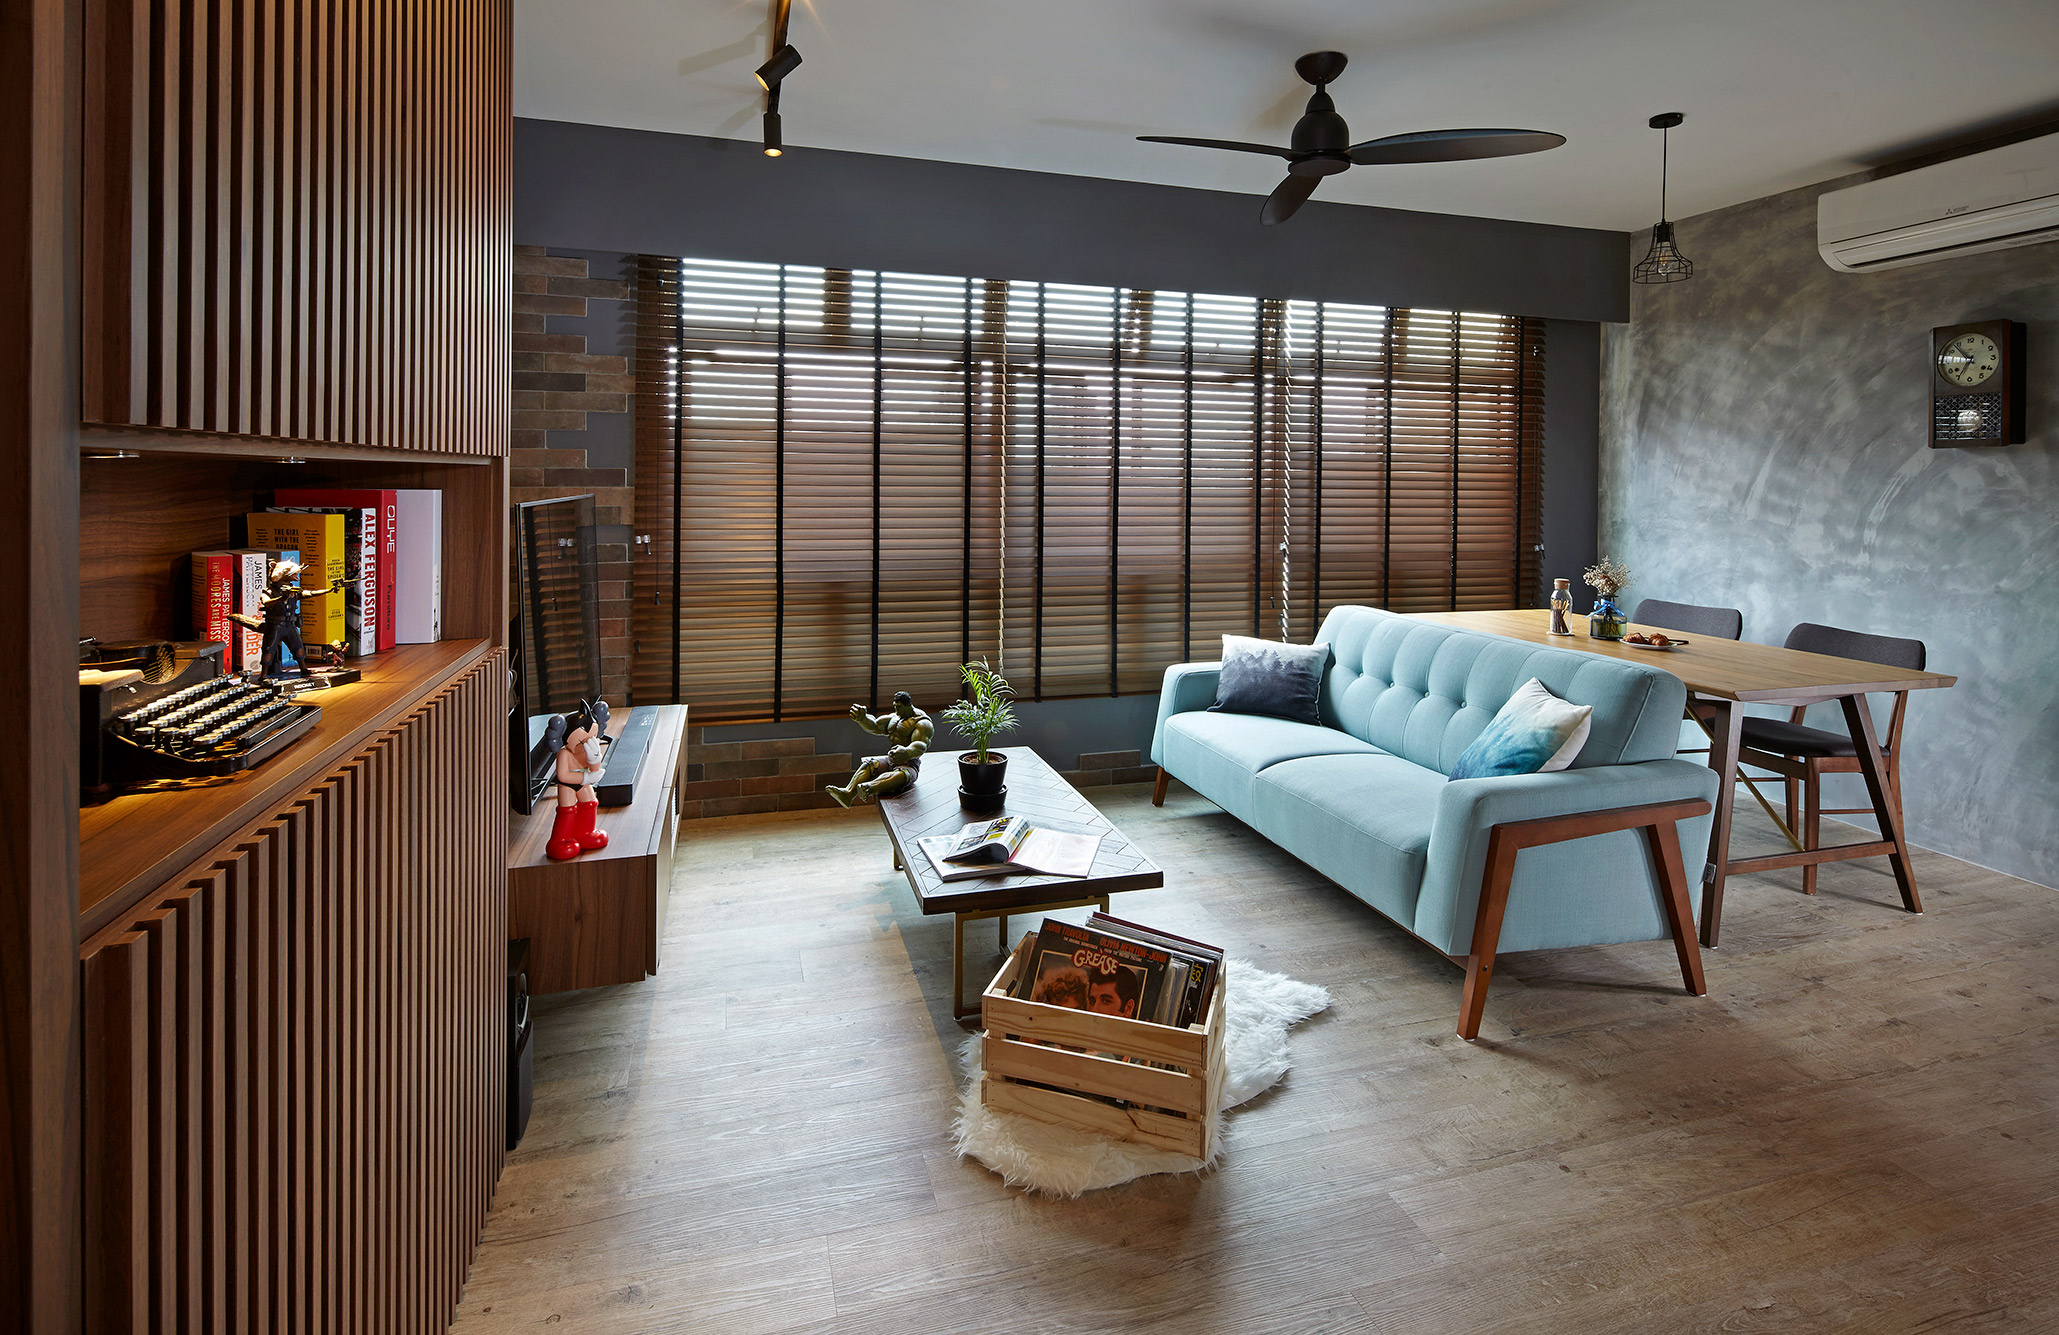 squarerooms-notion-of-w-singapore-interior-design-living-room-home-cosy-moody-wood-classy